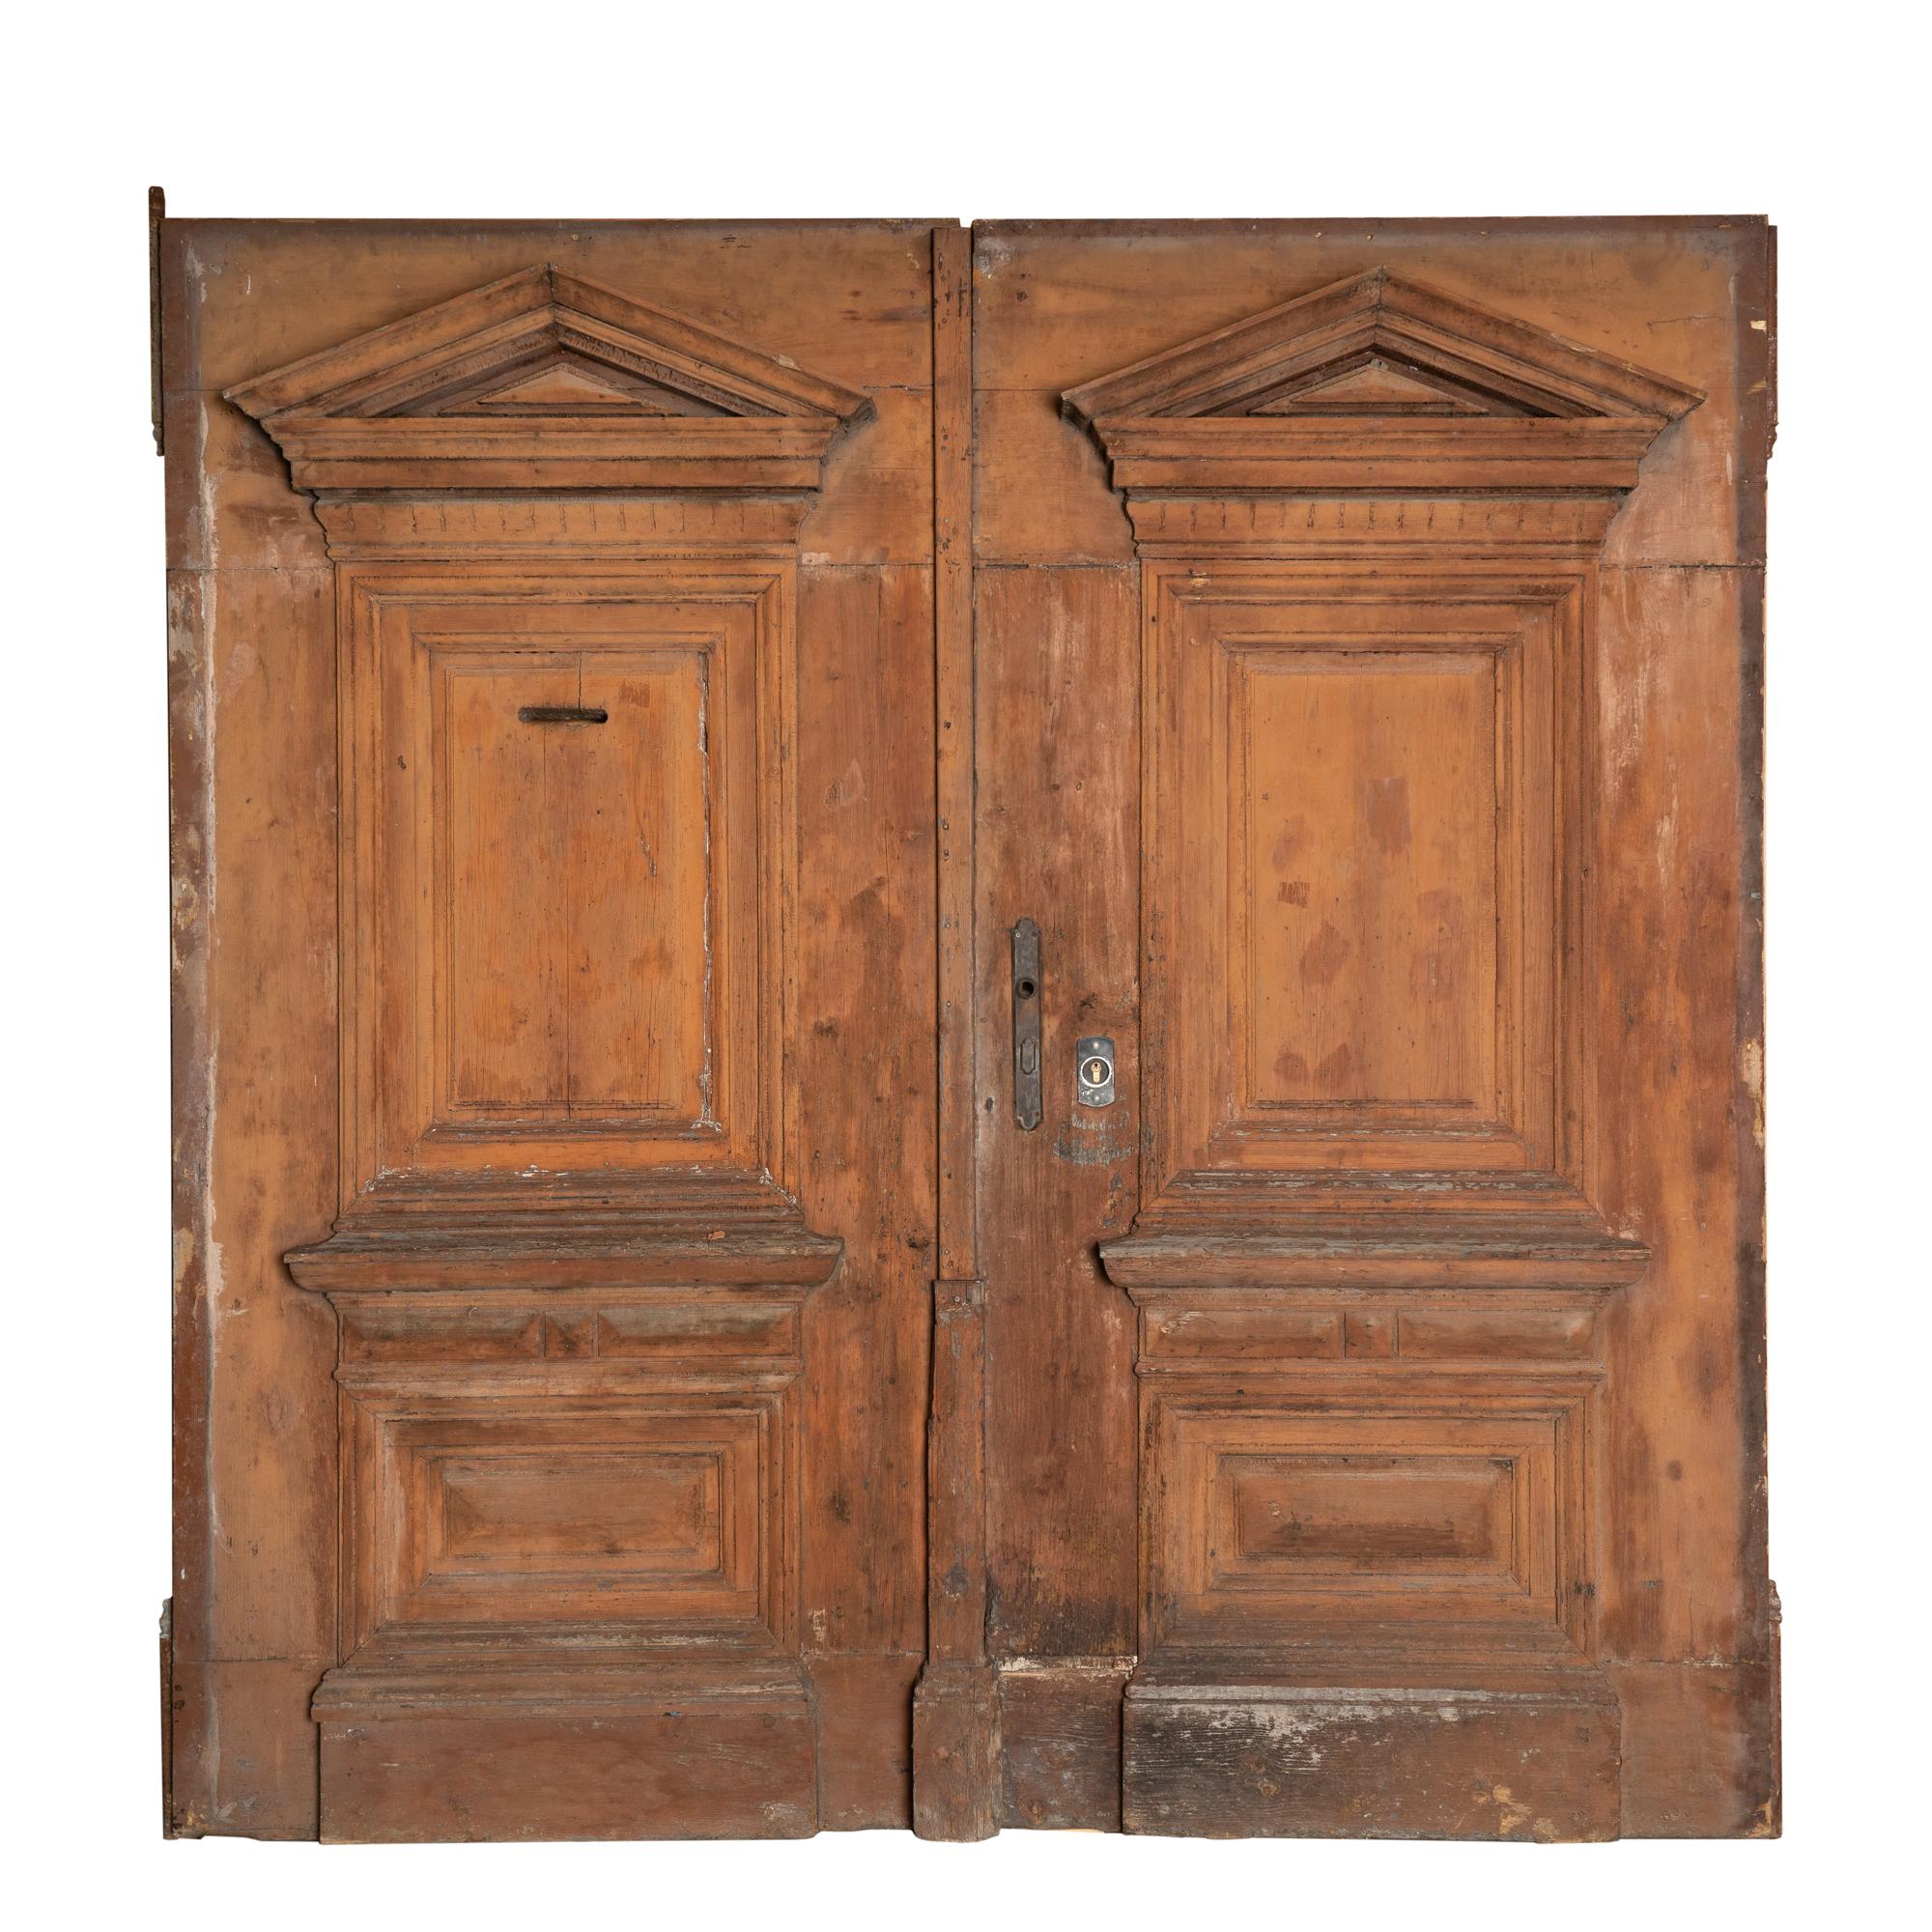 This massive pair of painted doors make an impressive architectural statement standing 12.5' tall with the arched transom included.
Sold in original used condition, wood is solid/stable. All nicks, gouges, separations, distress, abrasions,